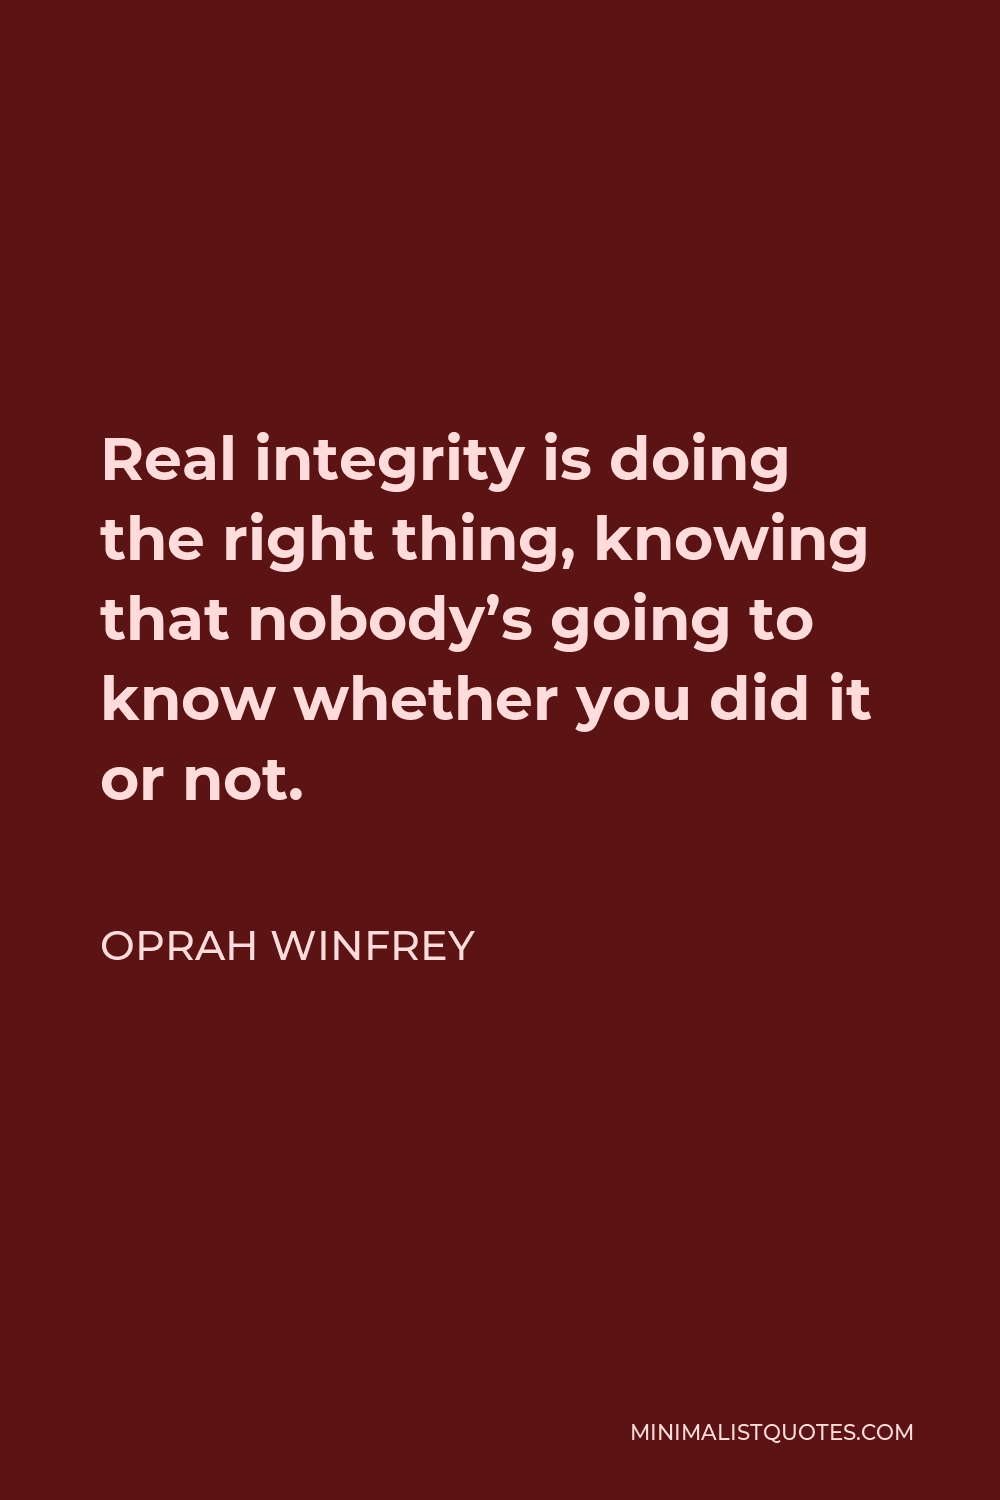 Oprah Winfrey Quote - Real integrity is doing the right thing, knowing that nobody’s going to know whether you did it or not.